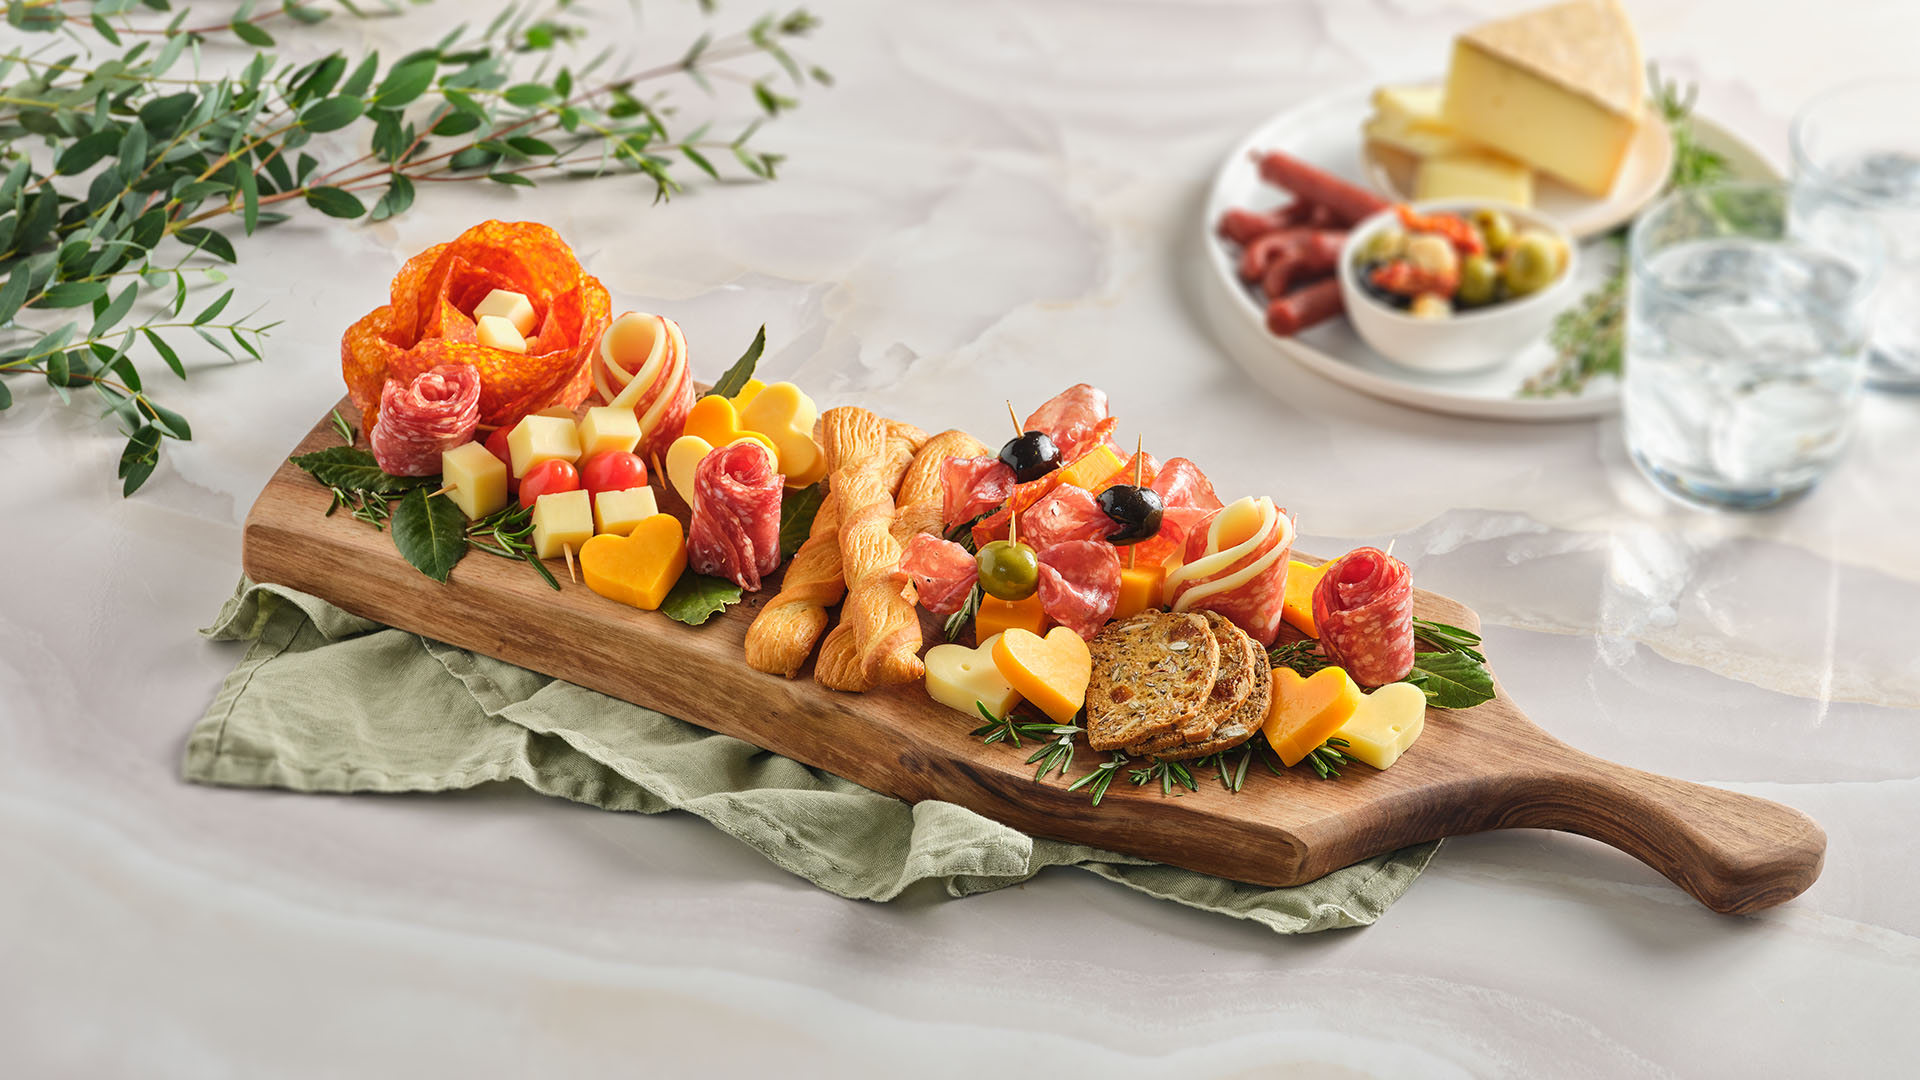 A rectangular, wooden board with assorted artisanal cheeses and meats, the board is on top of a light green napkin.